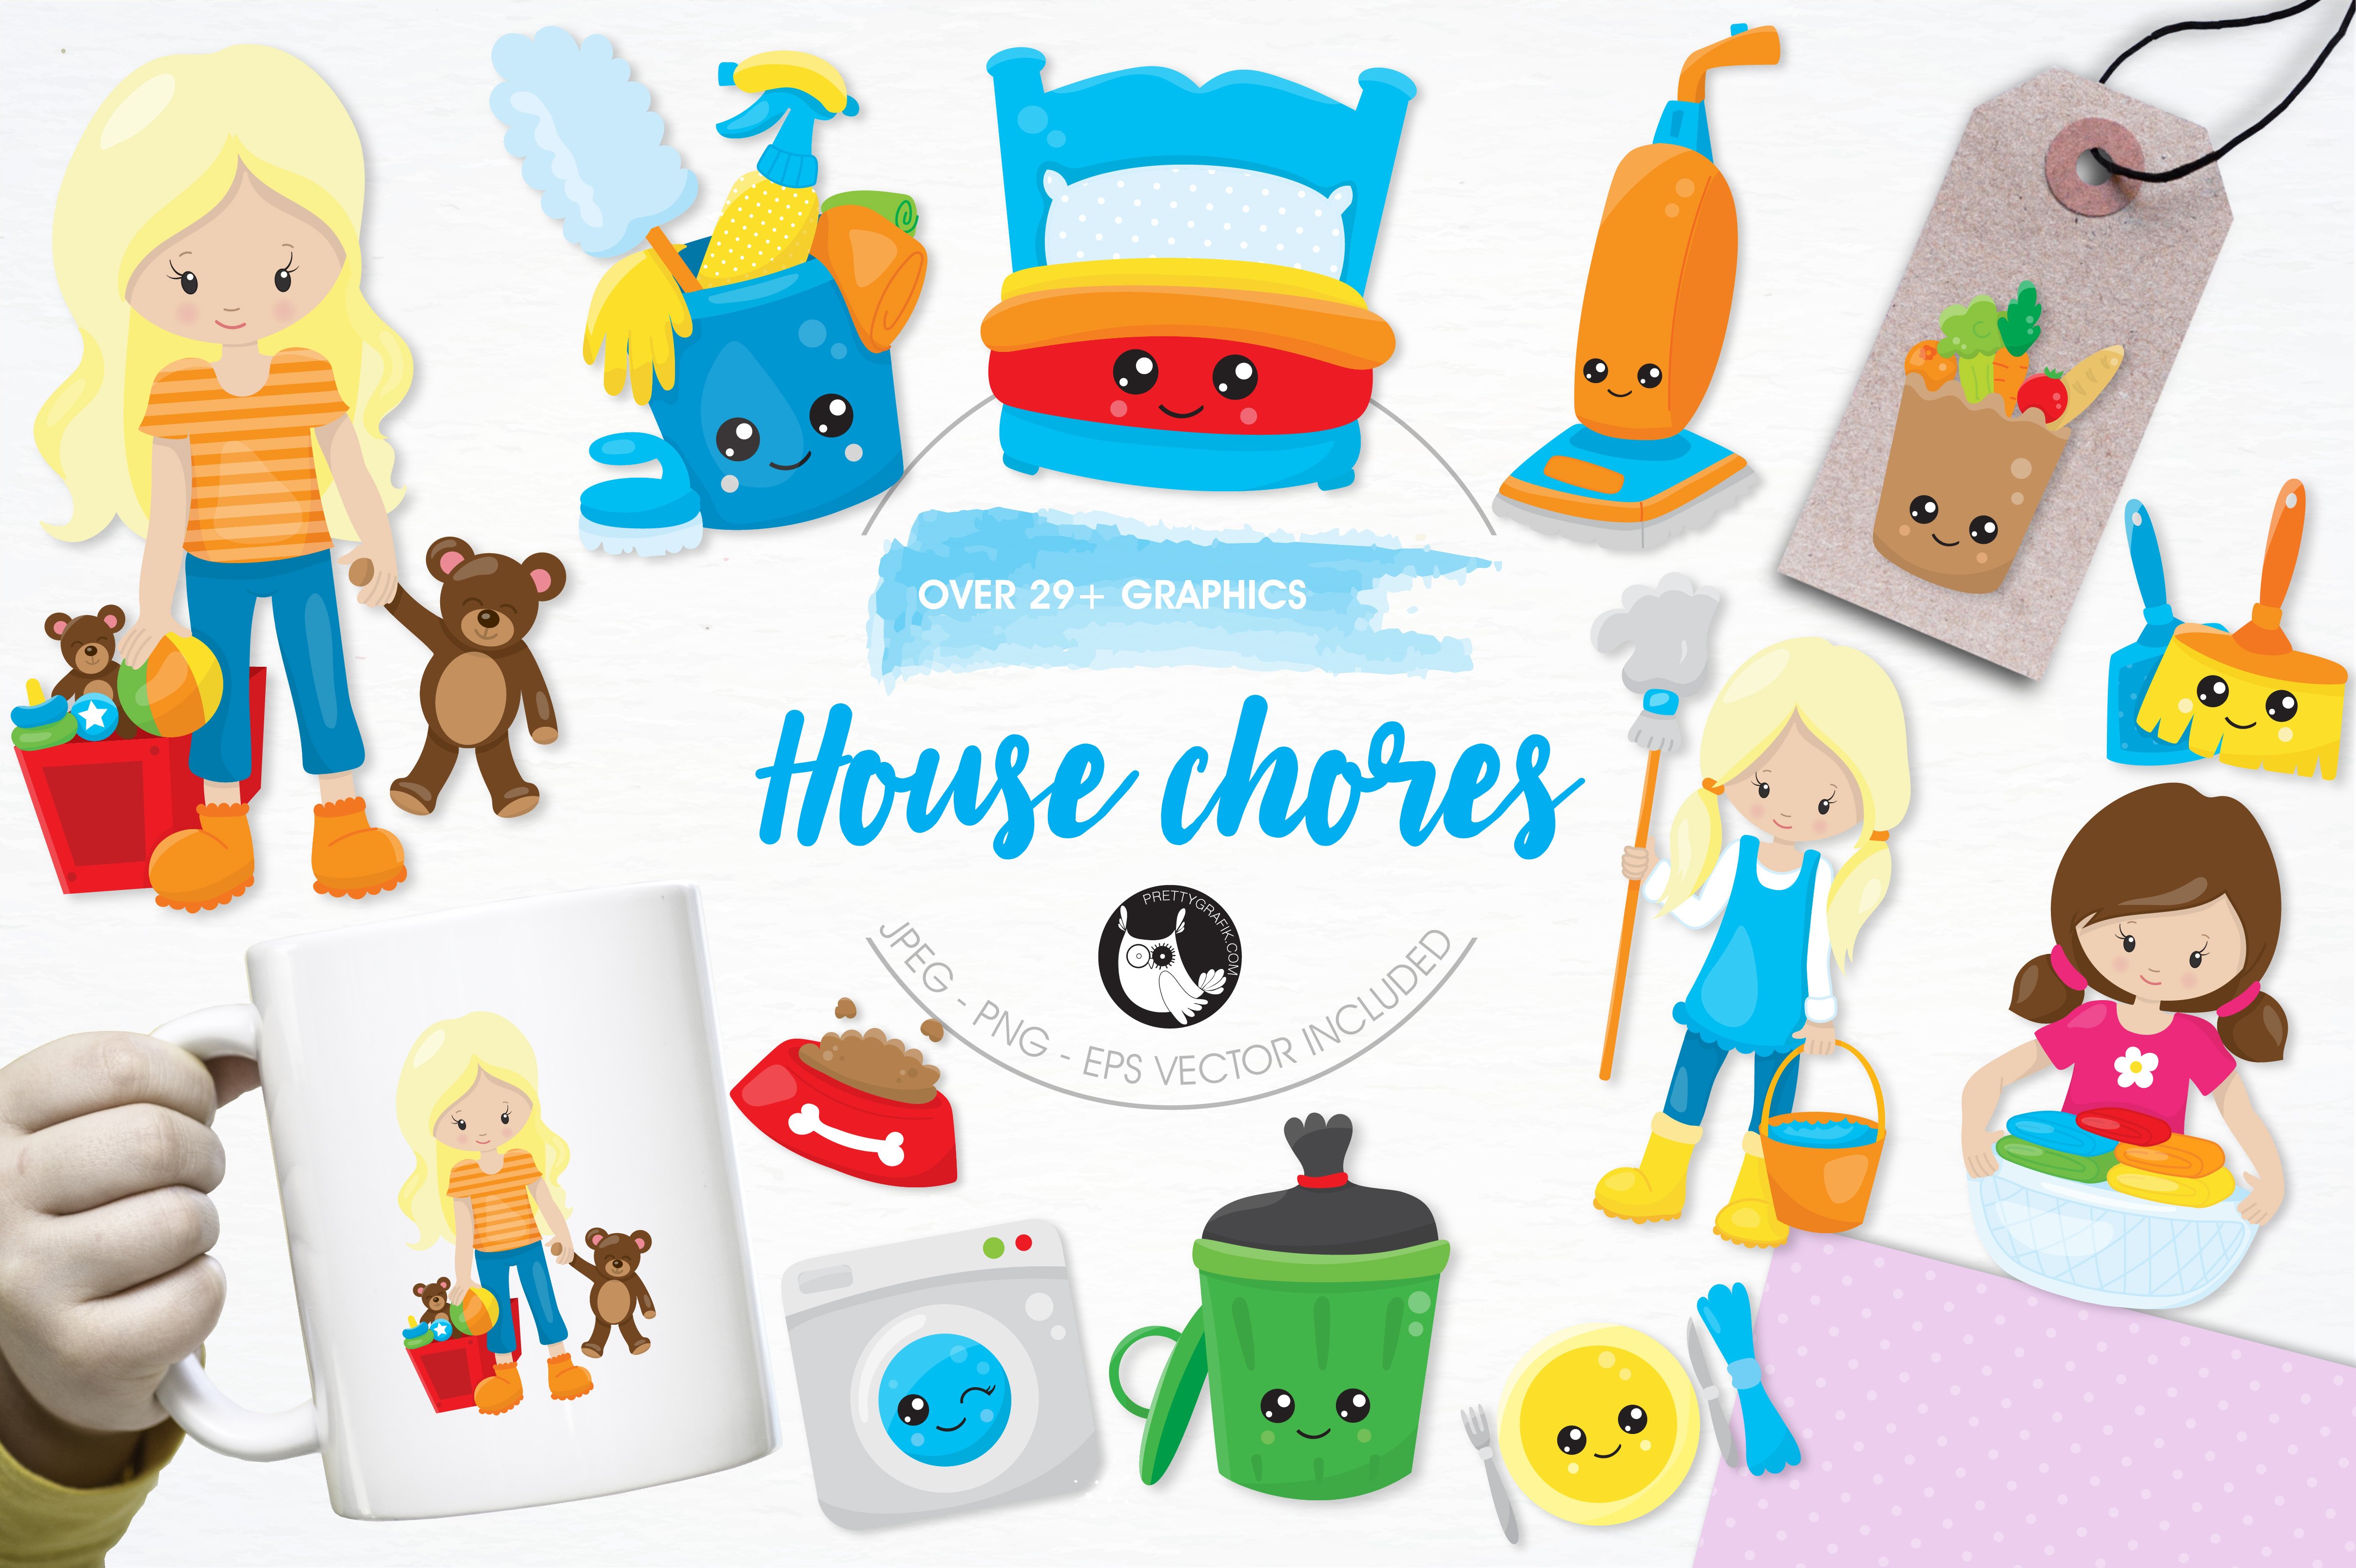 House chores illustration pack - Vector Image